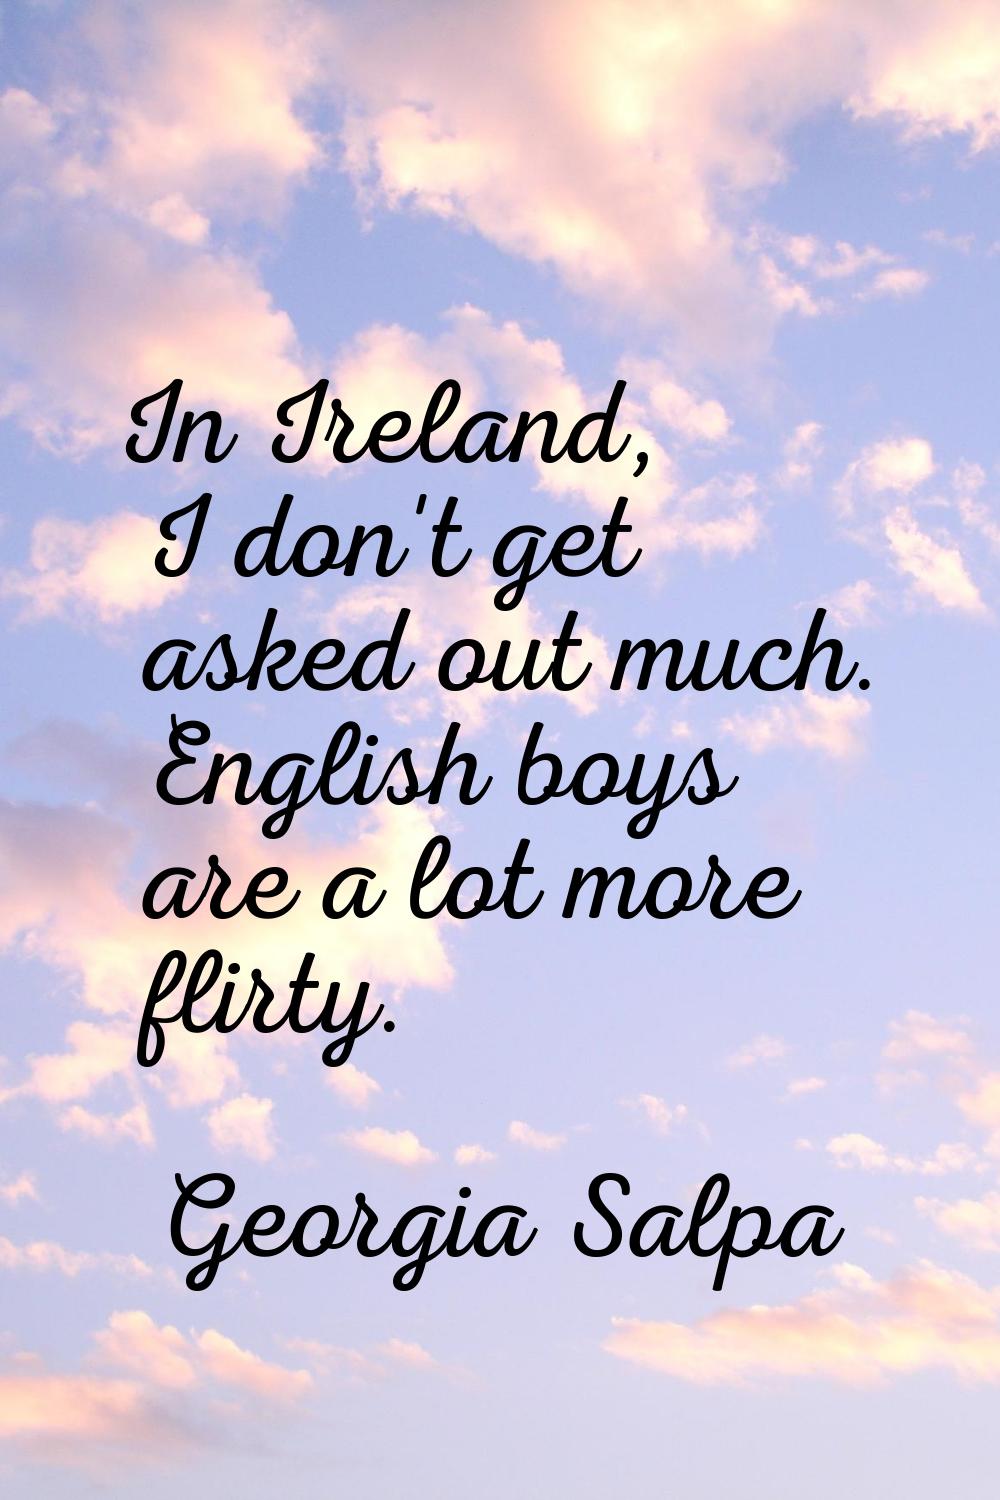 In Ireland, I don't get asked out much. English boys are a lot more flirty.